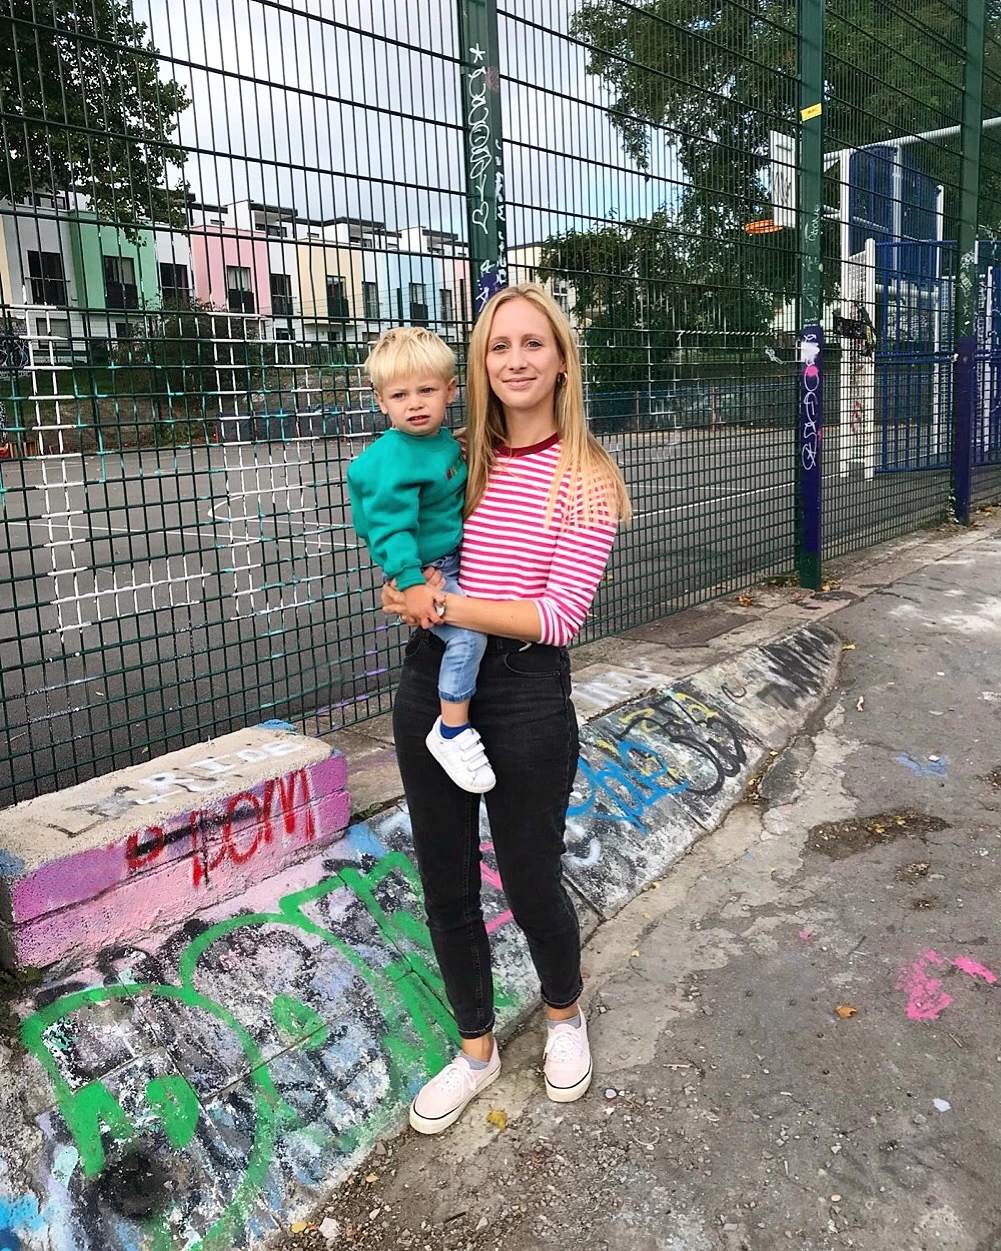 A blonde woman holding a small blonde child in a skatepark